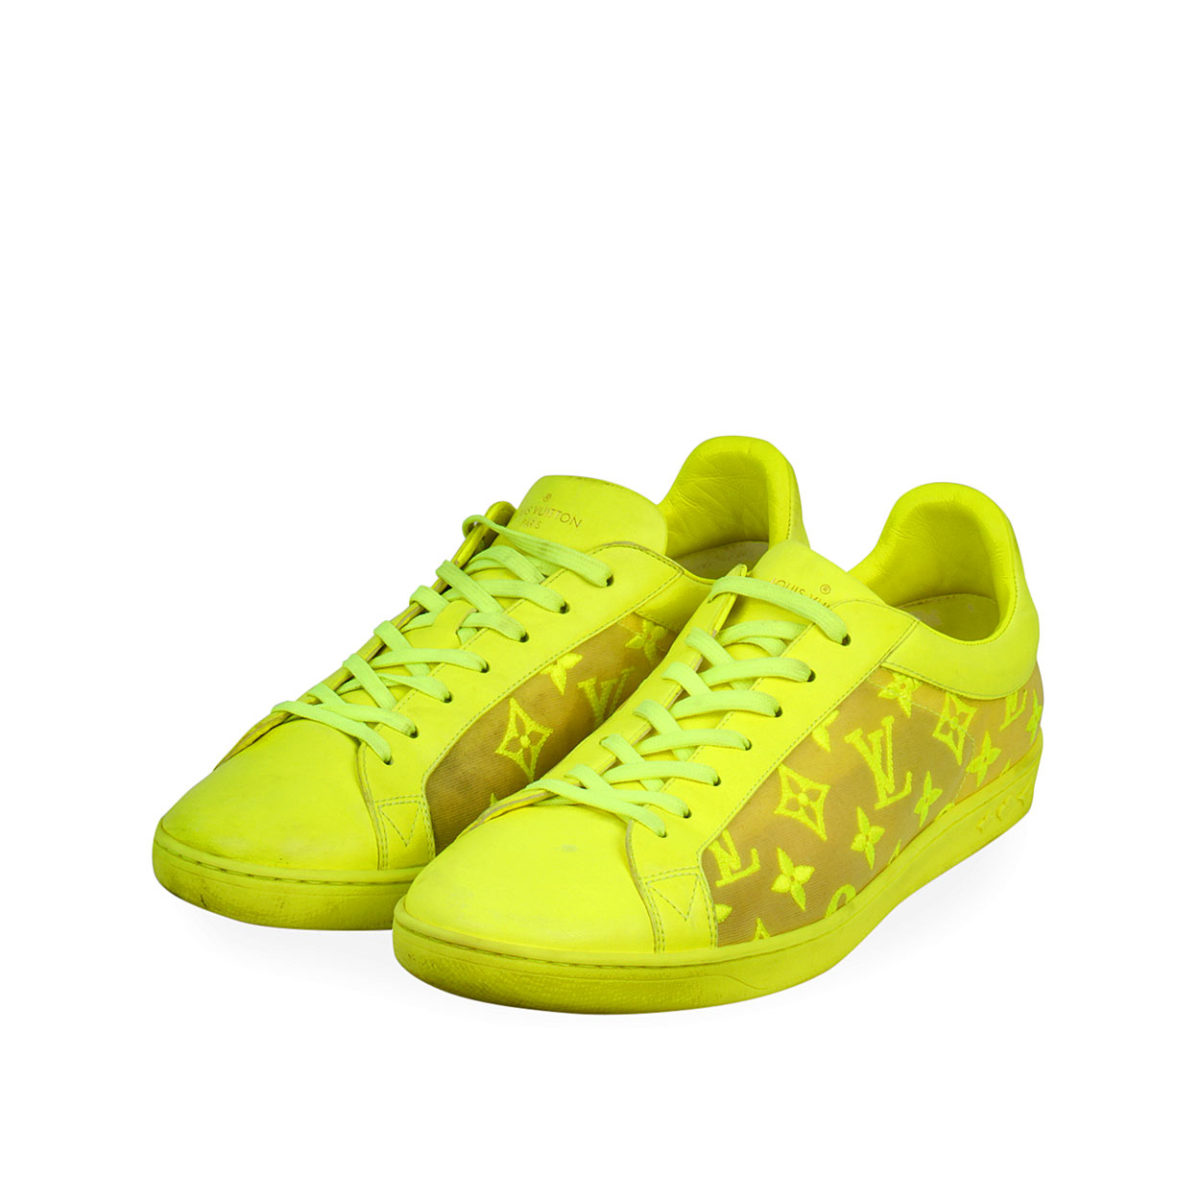 LOUIS VUITTON Tattoo Luxembourg Sneakers Yellow - S 43 (9) | Luxity